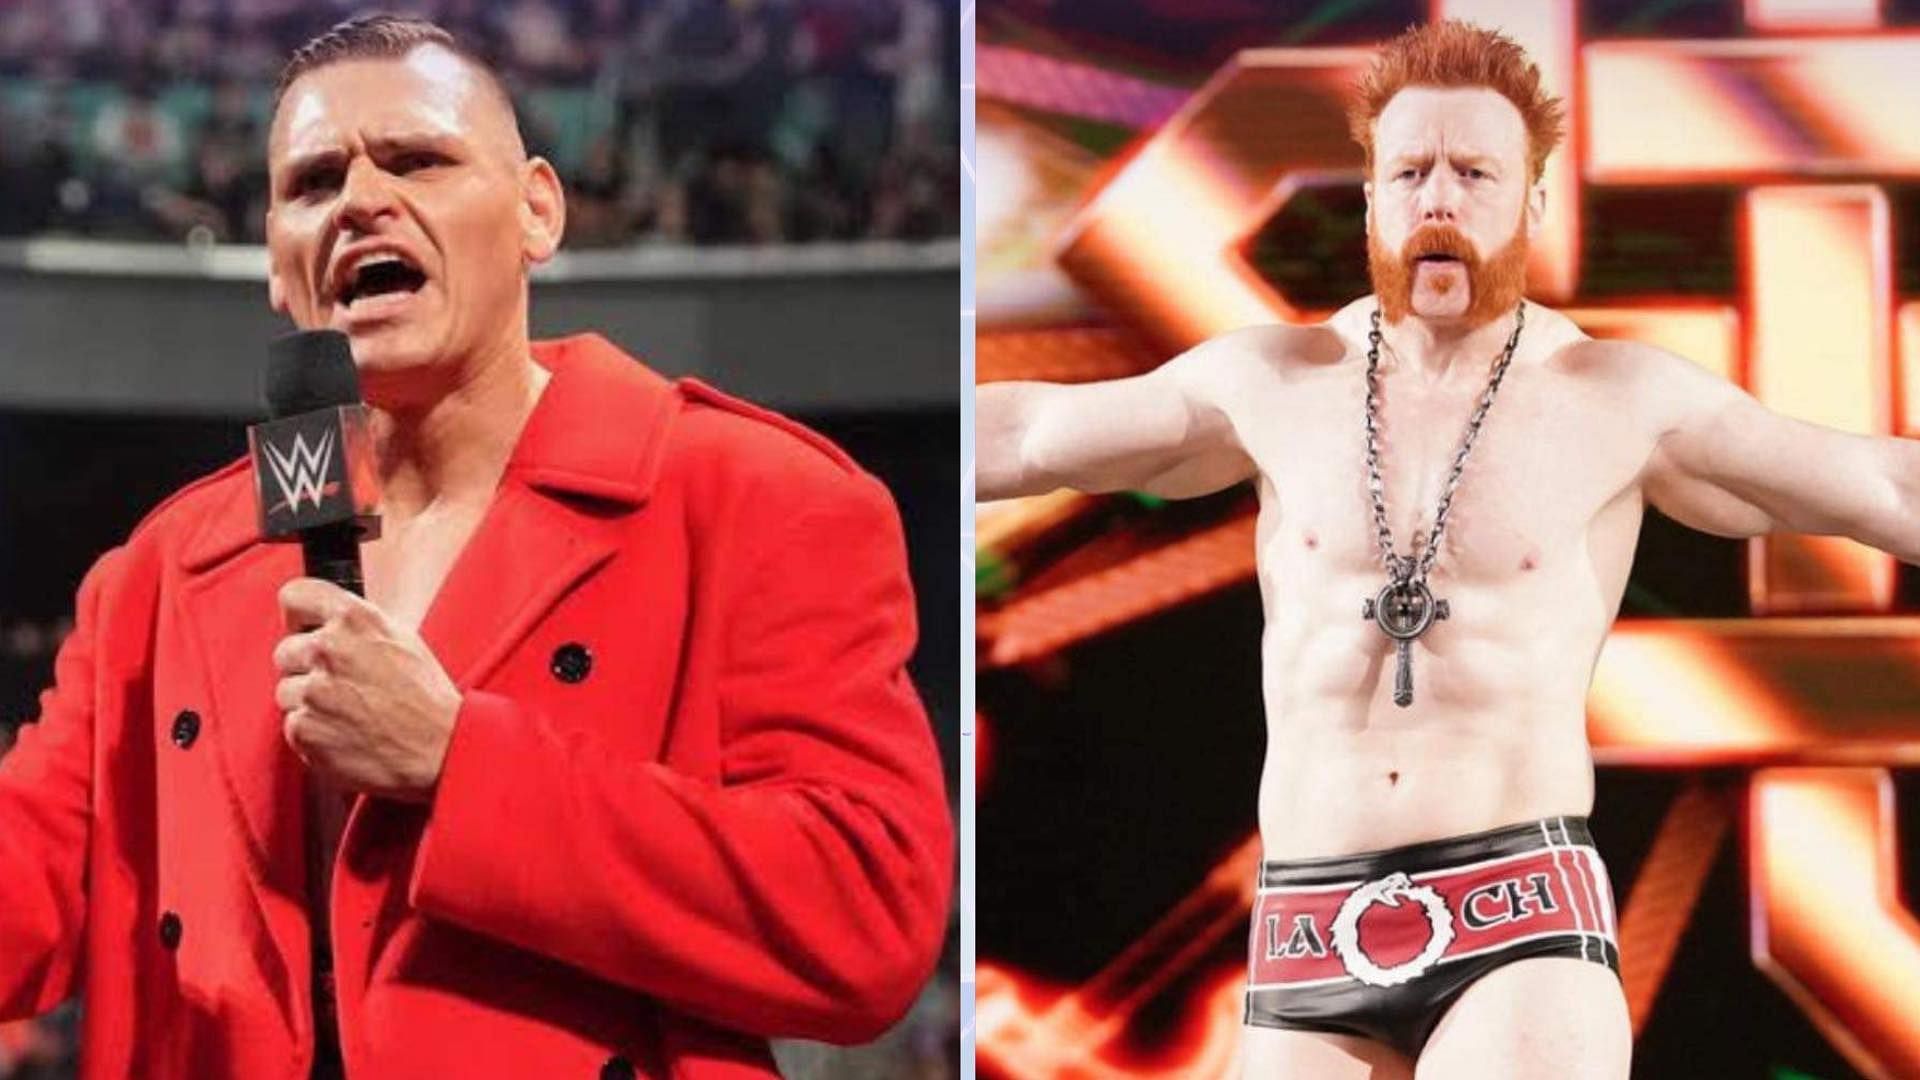 Gunther and Sheamus will renew their rivalry on WWE RAW